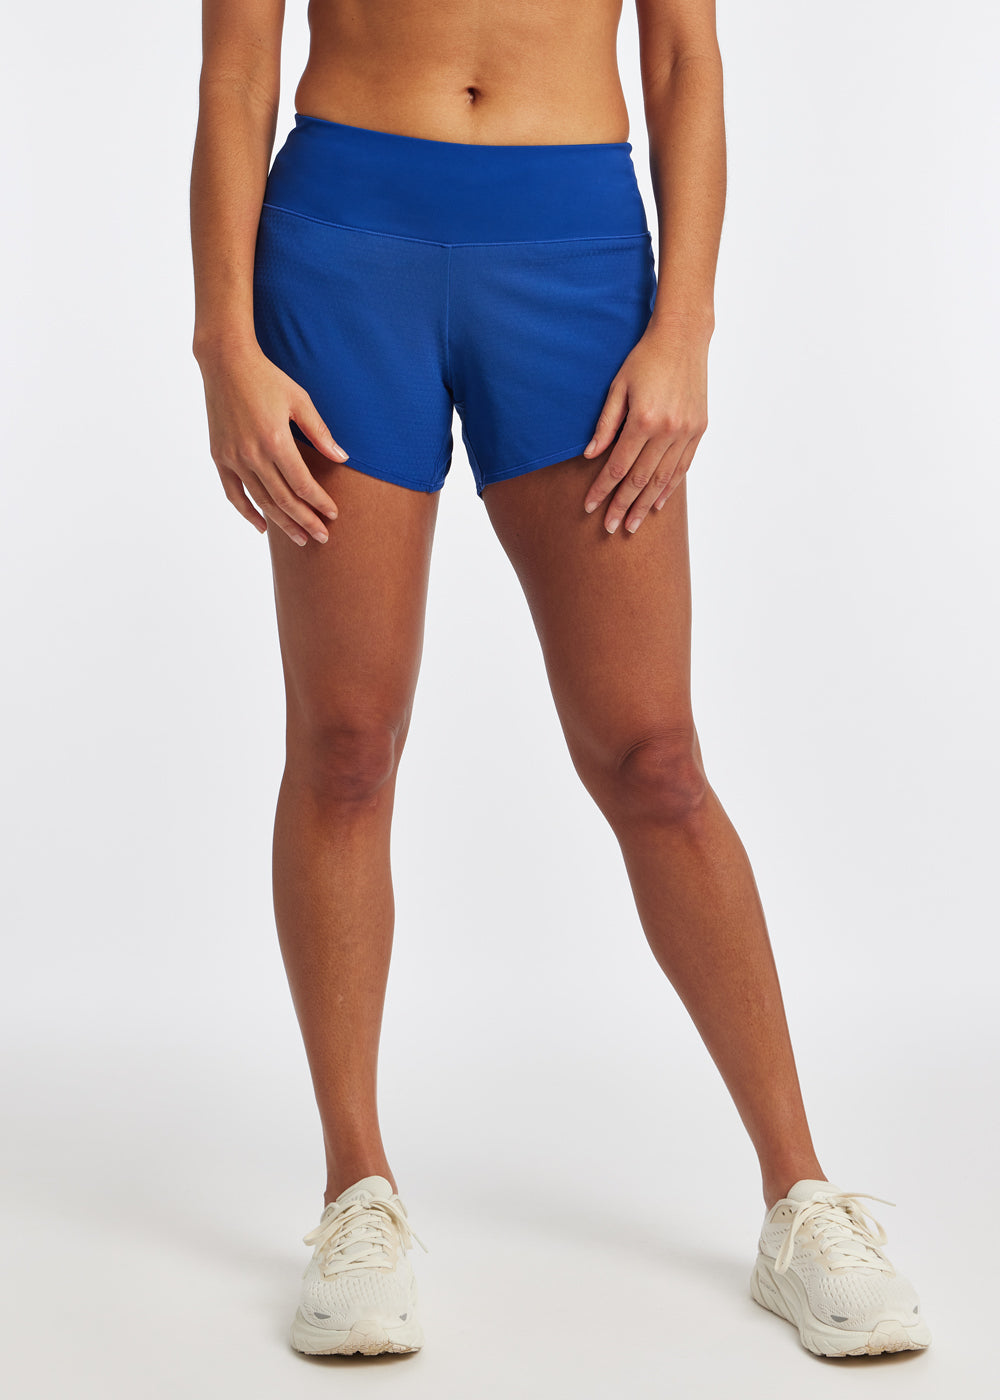 Oiselle Running Clothes For Women